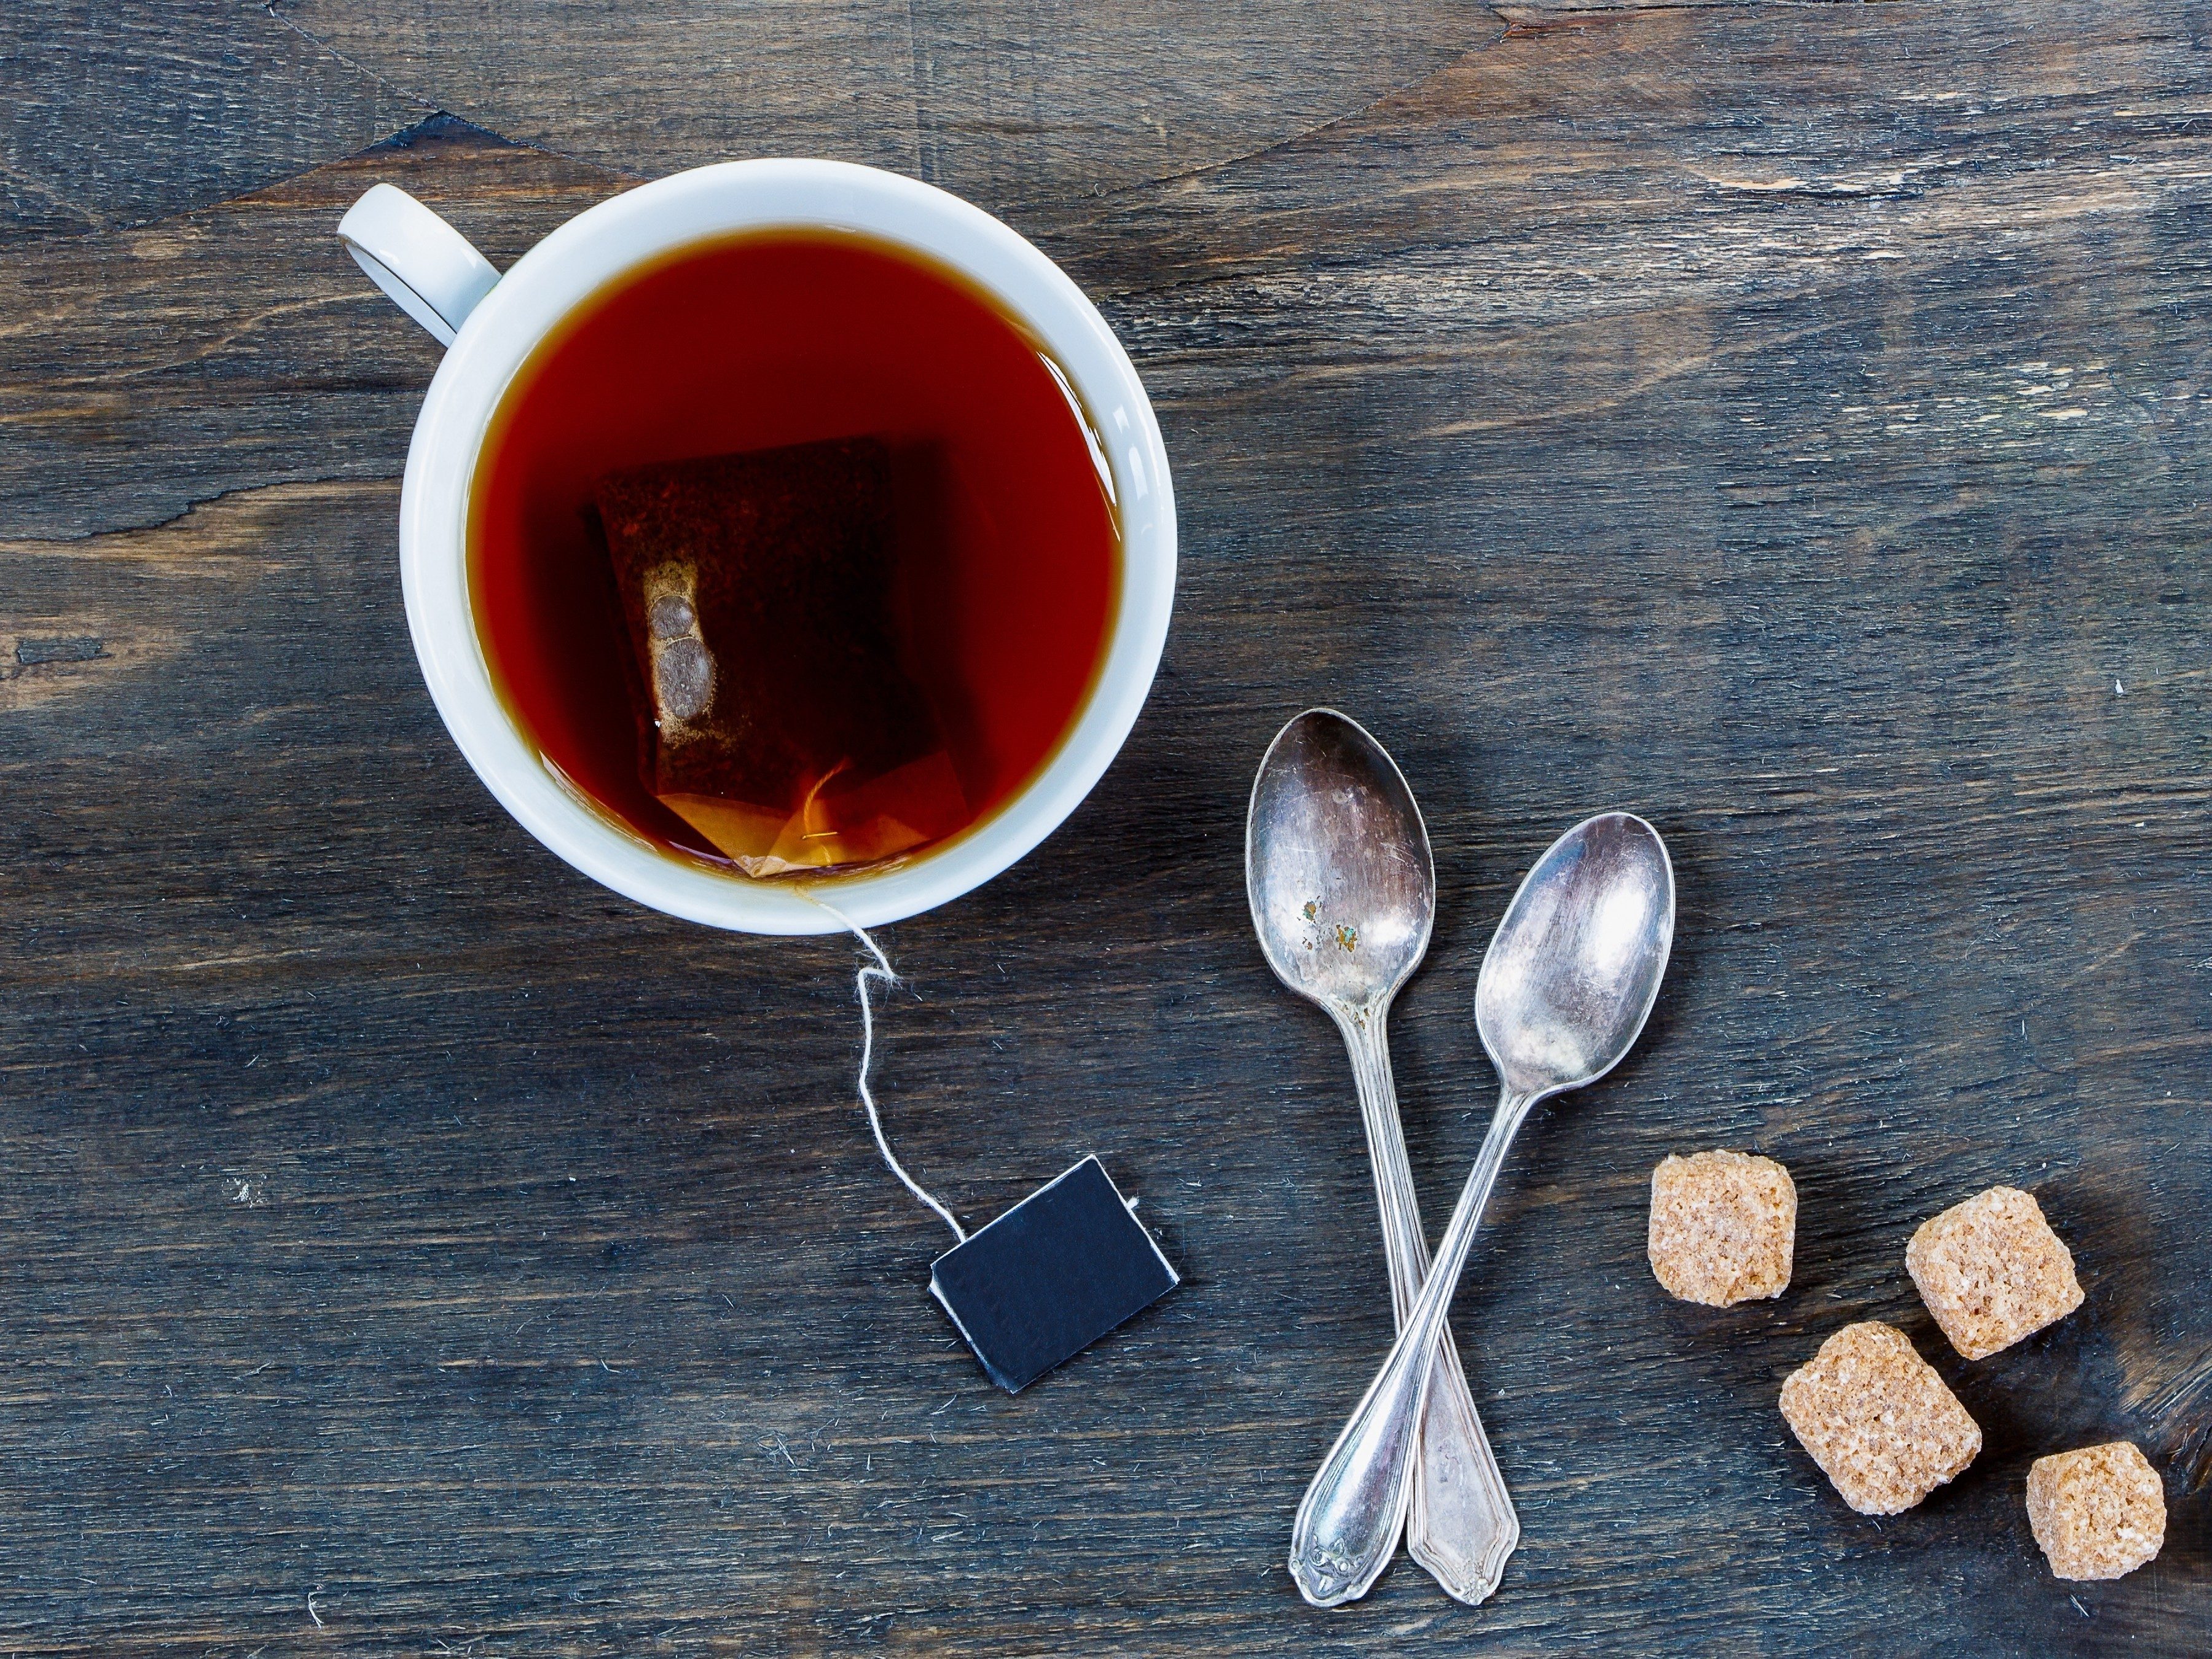 12. Boost your energy with caffeinated tea.